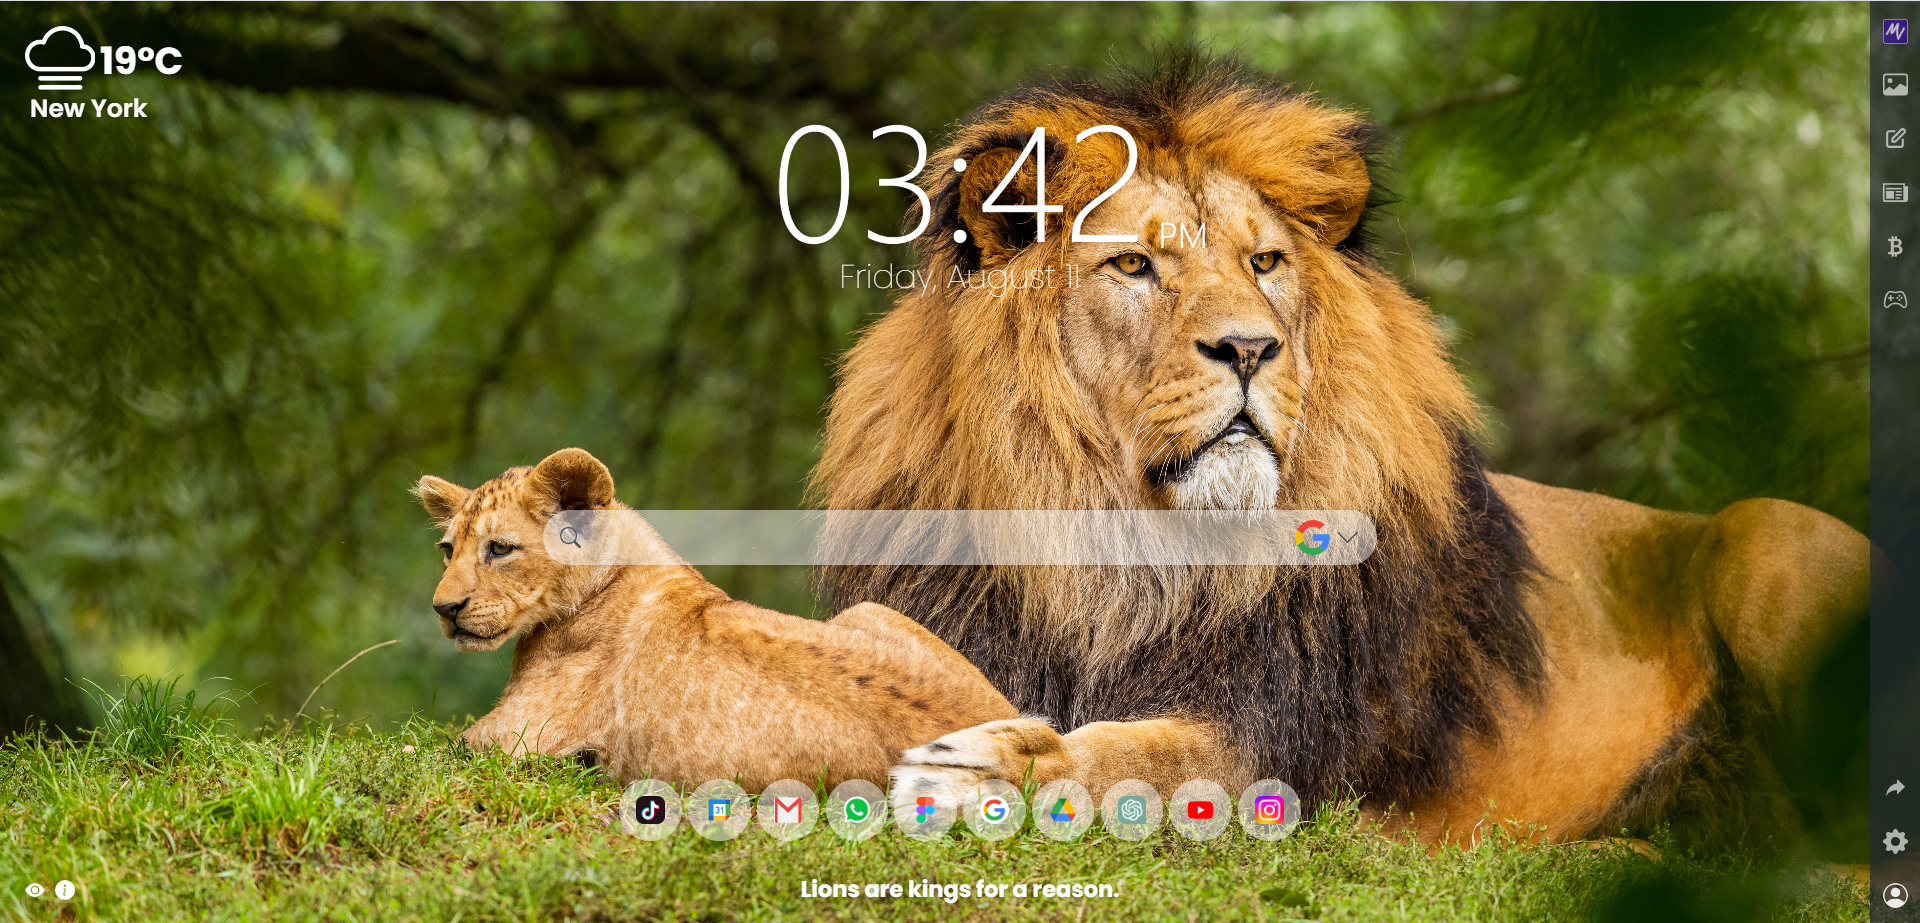 Bring the Wonders of Wildlife to Your Browser with the MeaVana Extension